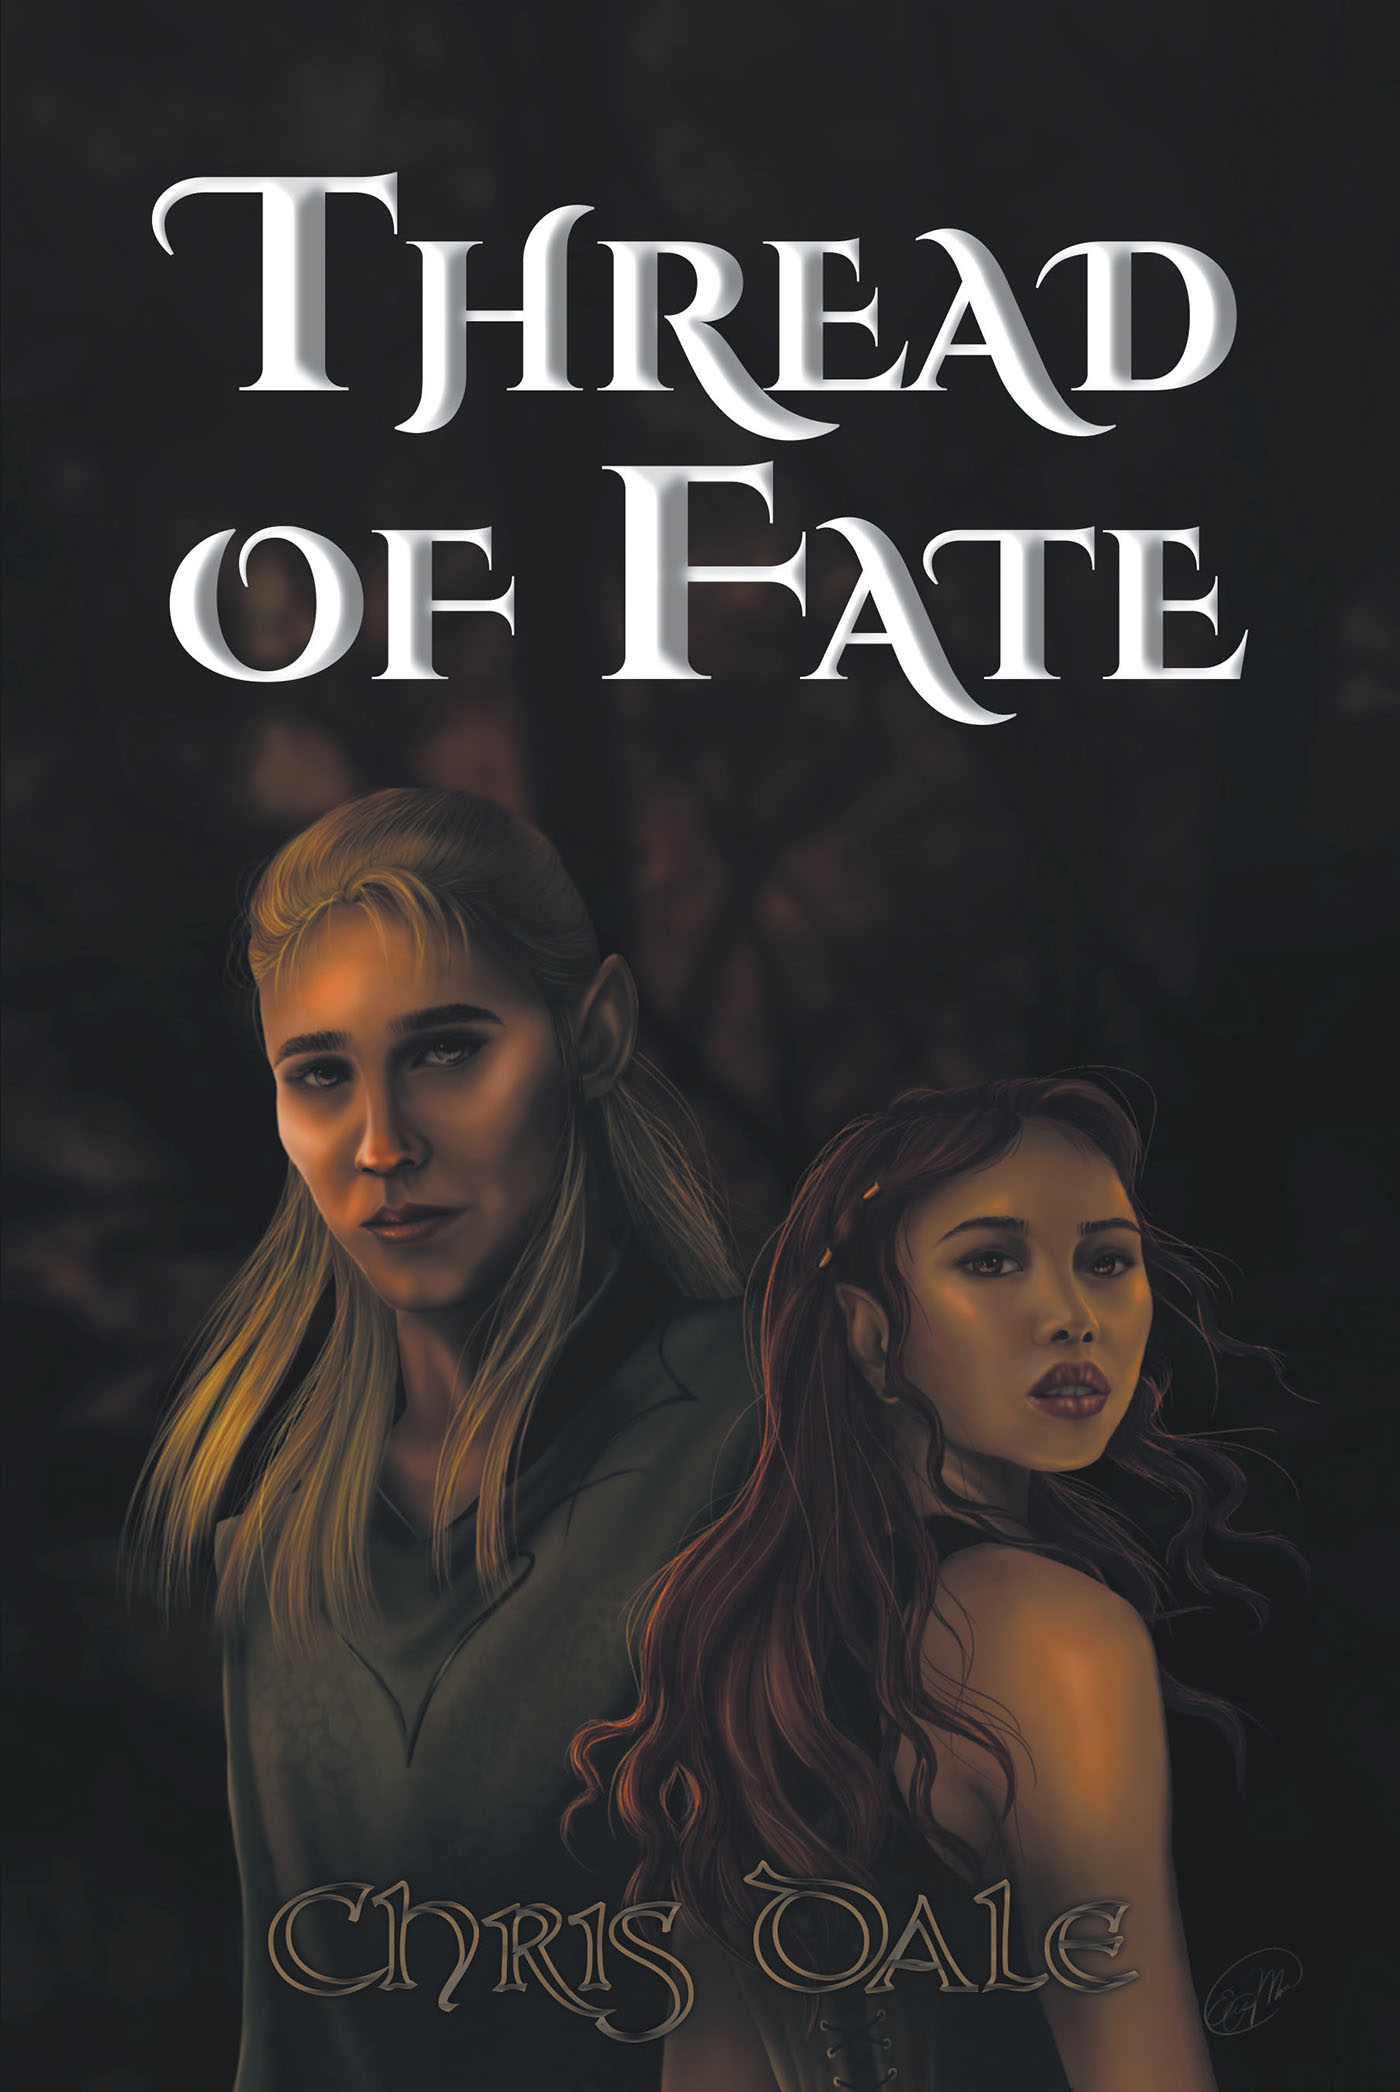 Chris Dale’s New Book, "Thread of Fate," Follows Two Elves Who Rebuke Their Monotonous Futures to Leave Their Homes on a Quest to See All That the World Has to Offer Them